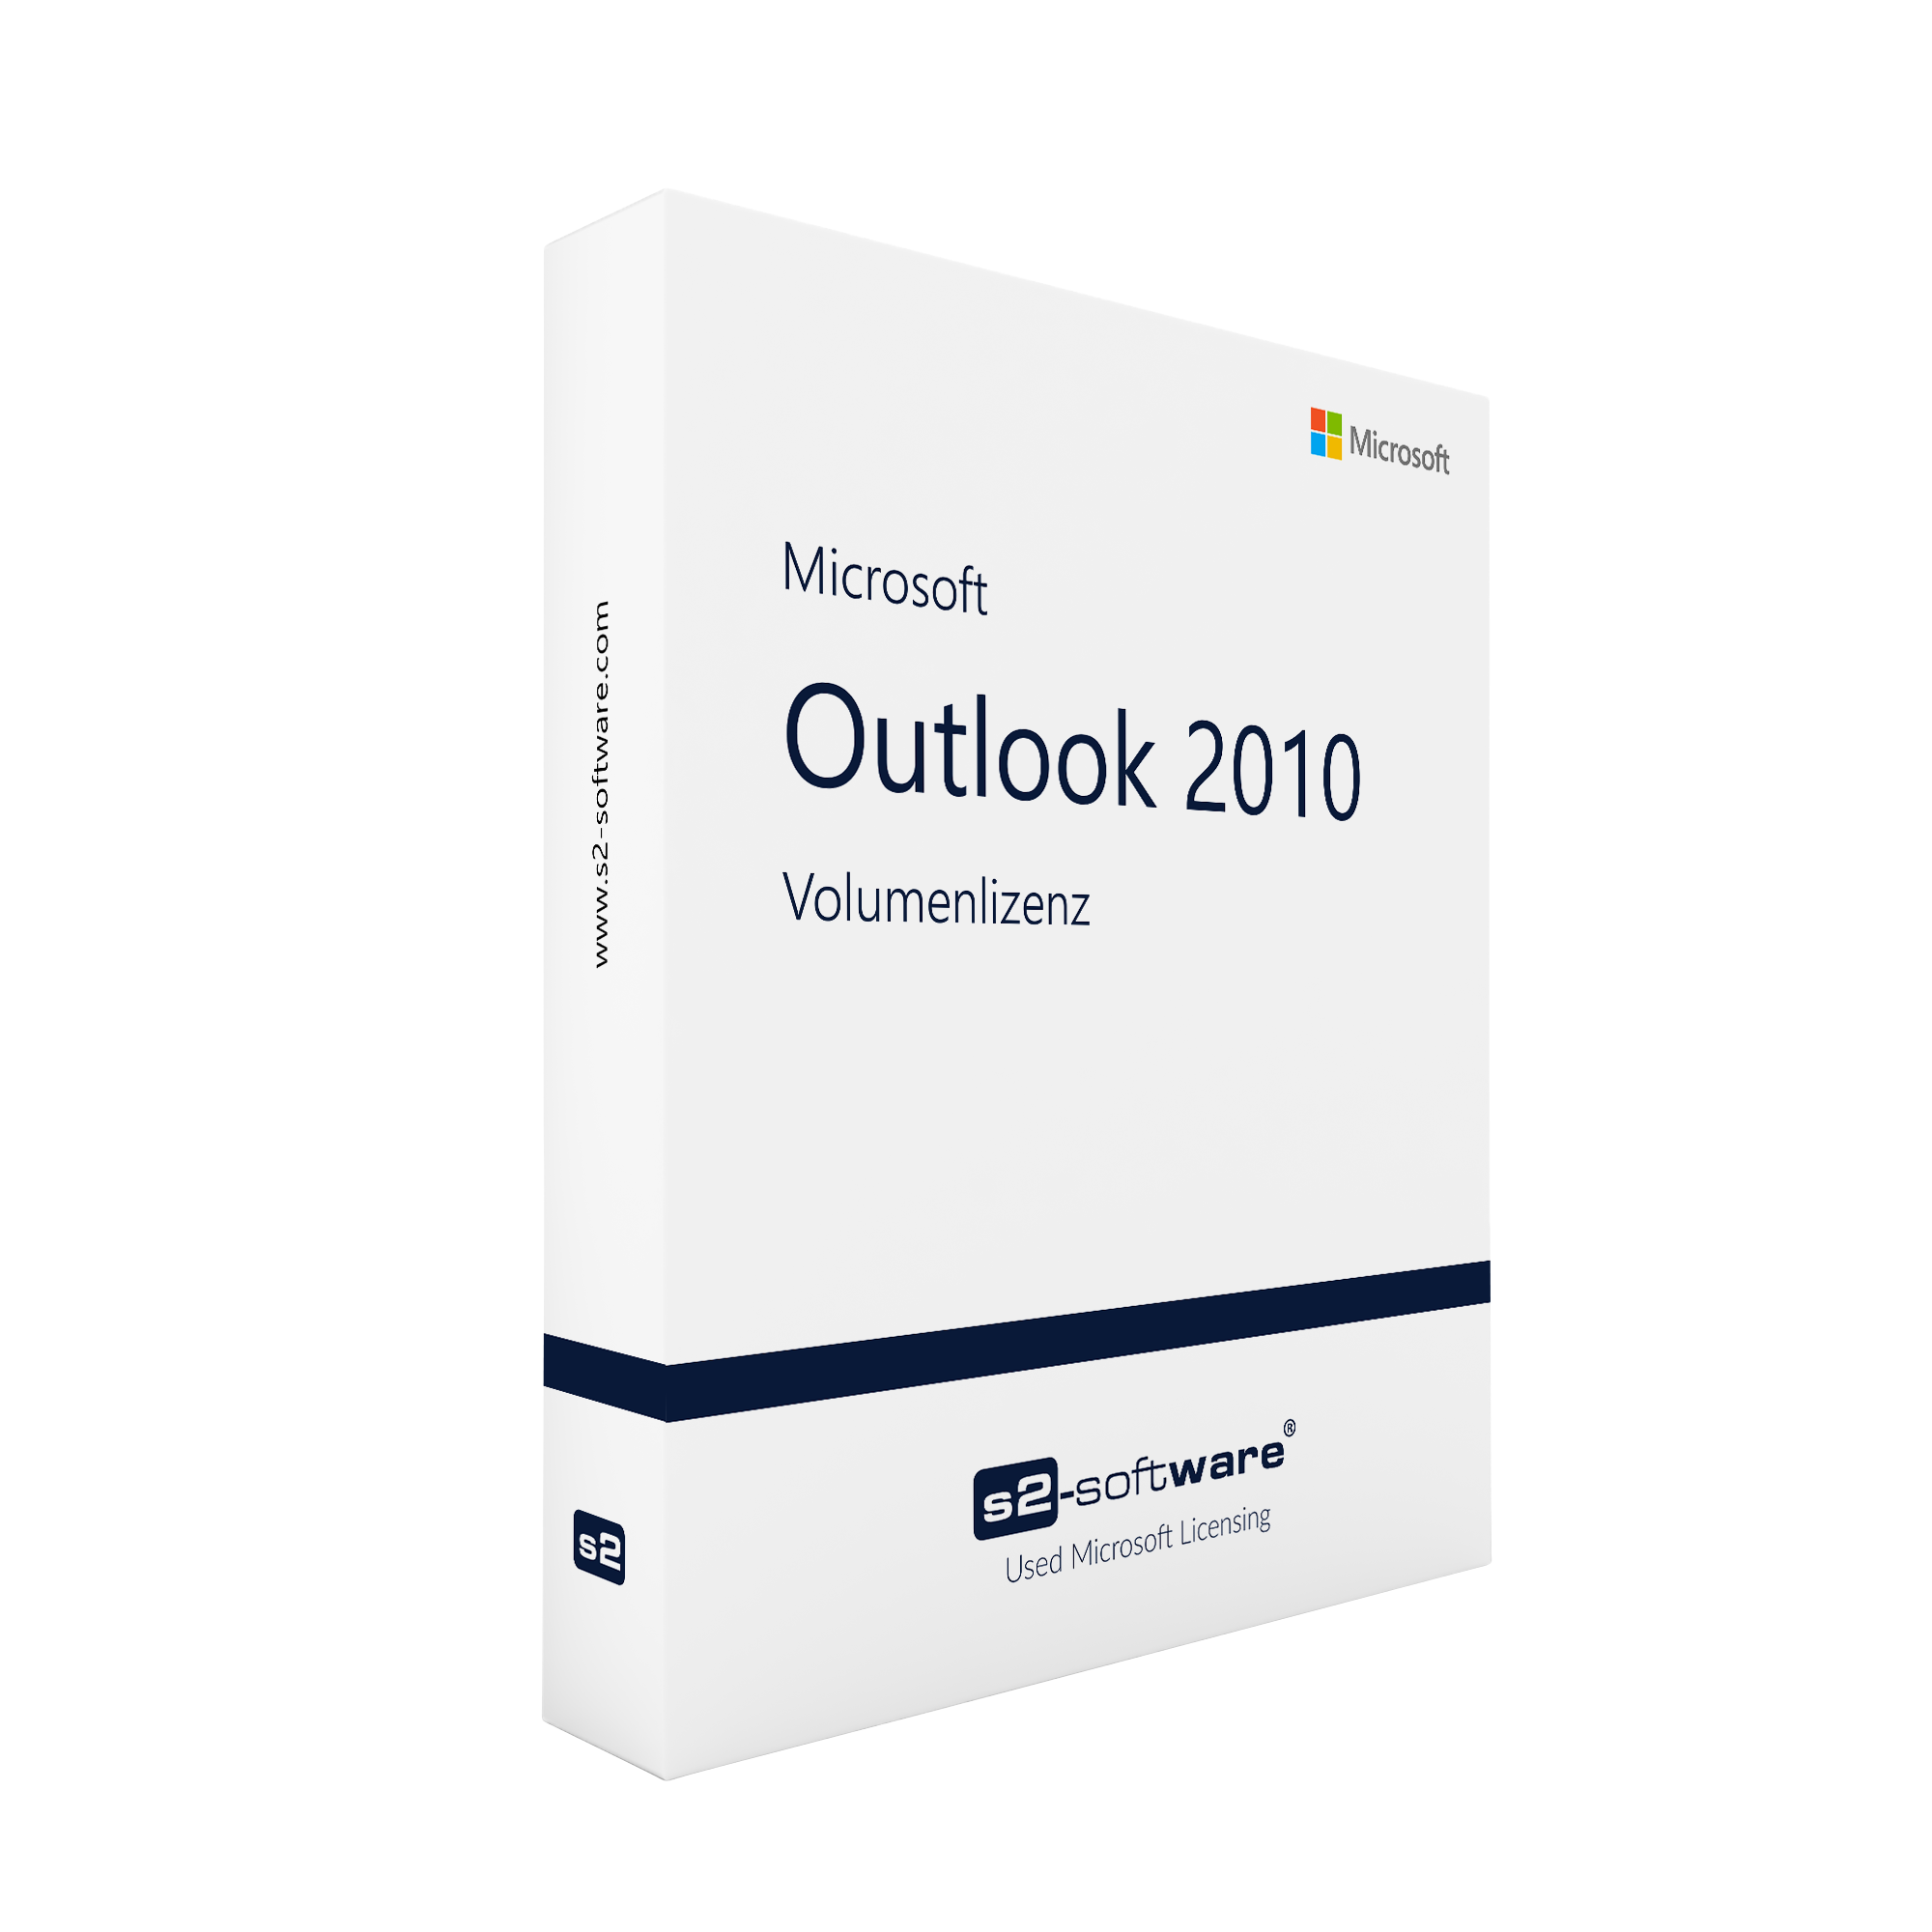 Office Outlook 2010